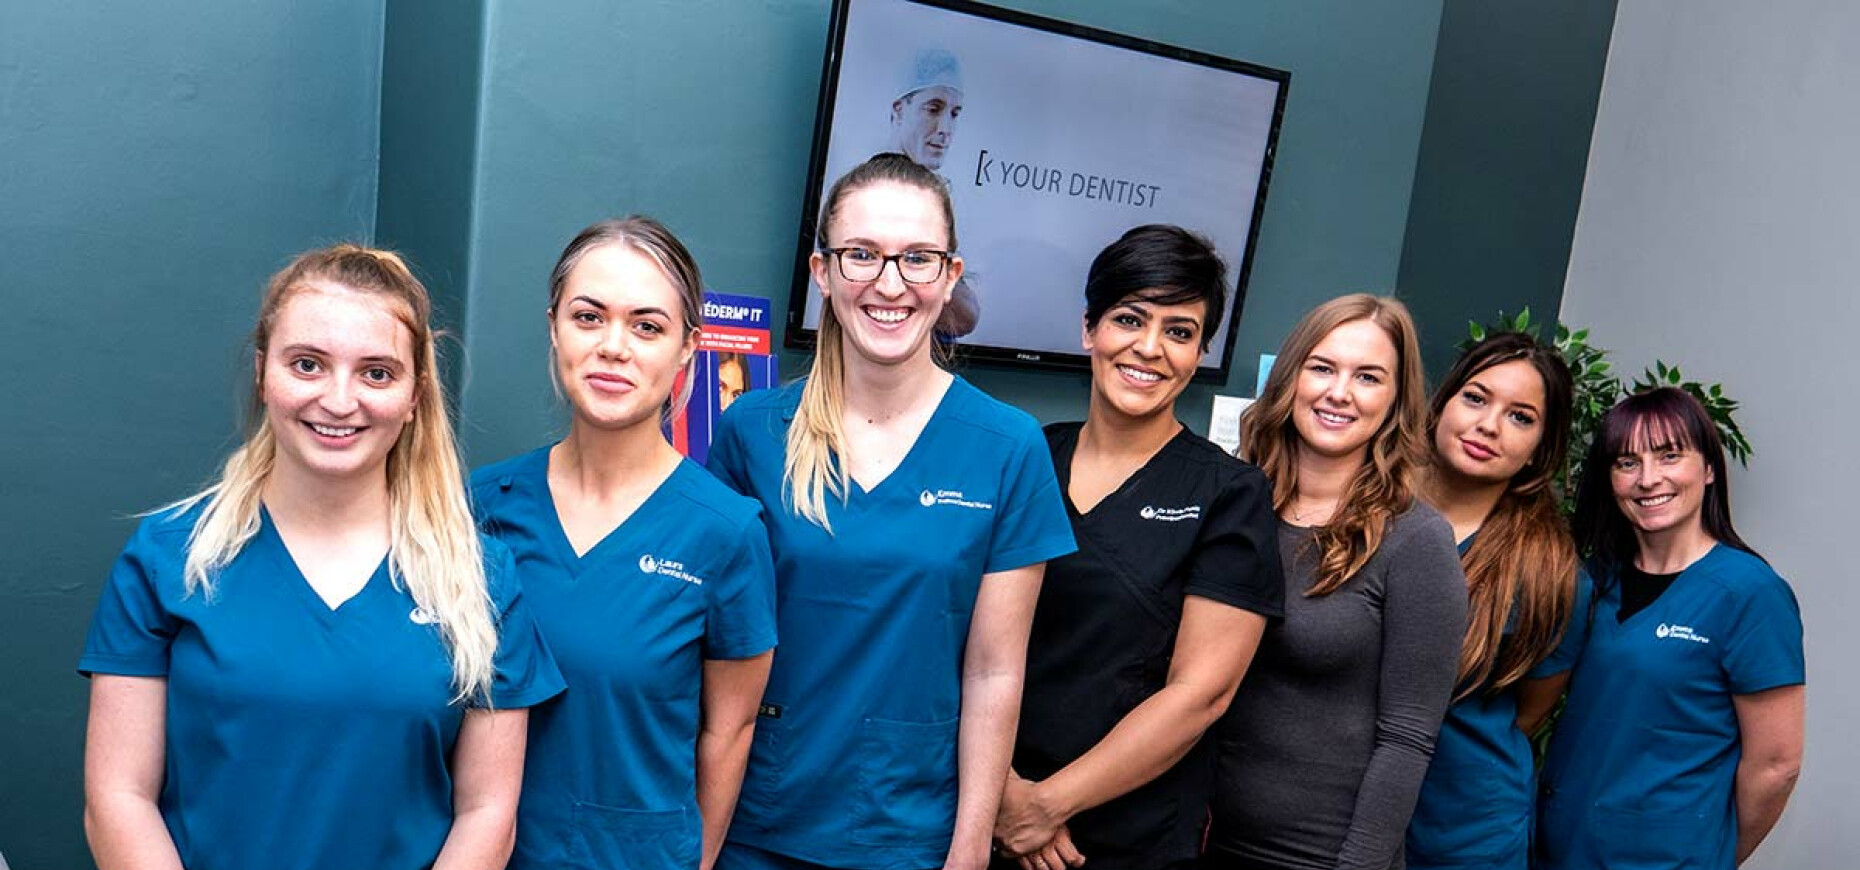 Huddersfield dental practice experiences surge in demand for cosmetic treatment